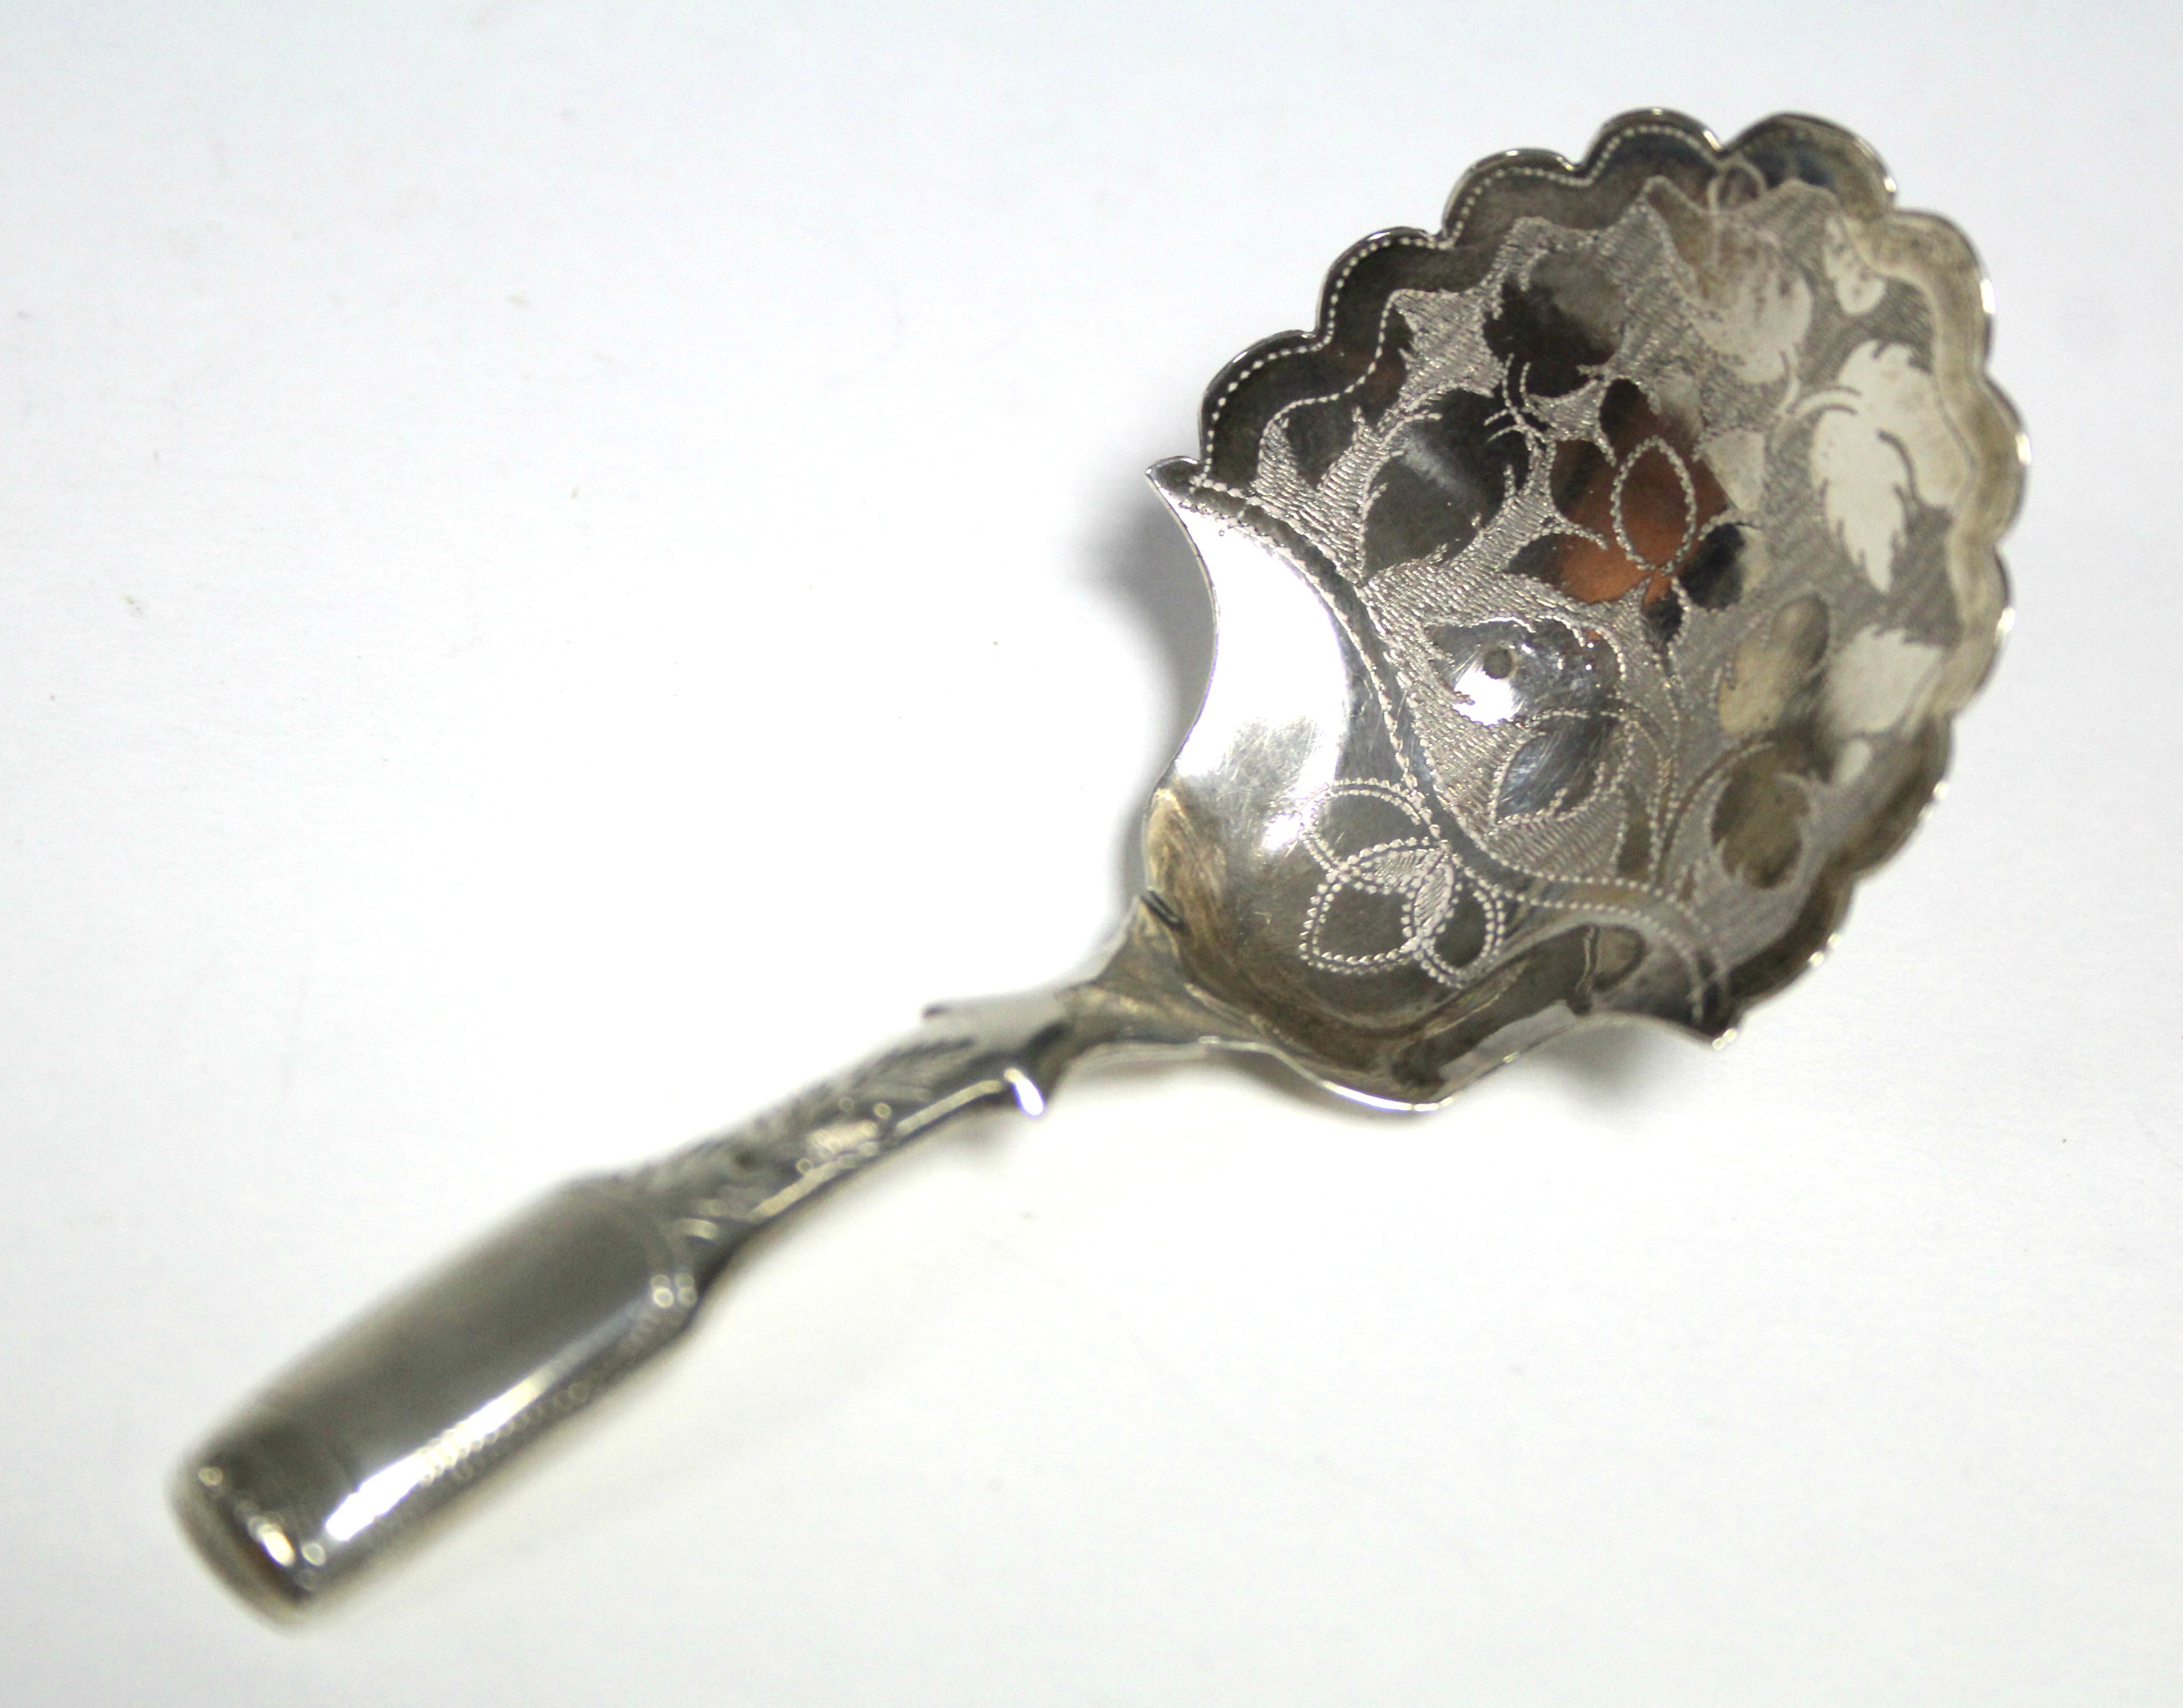 A George IV Fiddle pattern caddy spoon, the rounded shovel bowl with scalloped rim & engraved floral